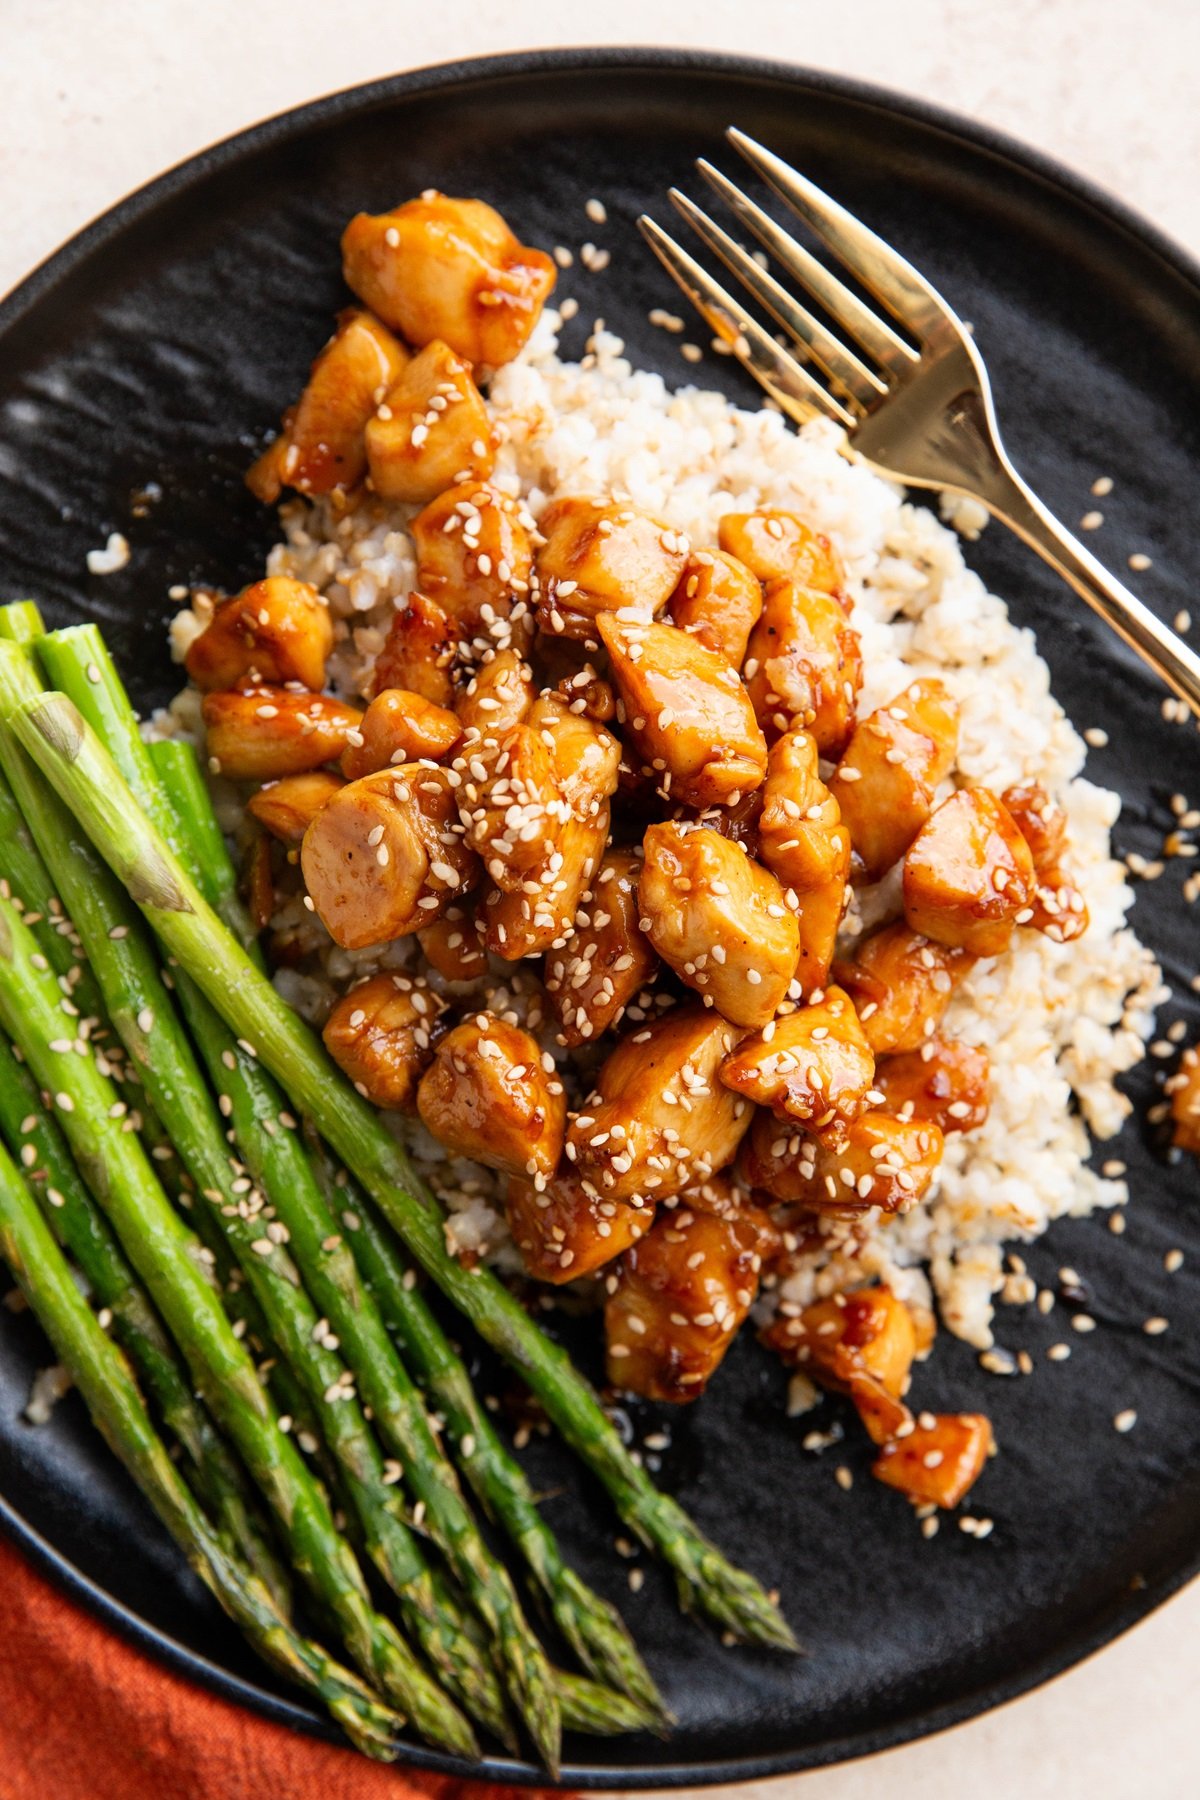 Black plate of sesame chicken with rice and asparagus. Red napkin and gold fork to the side.